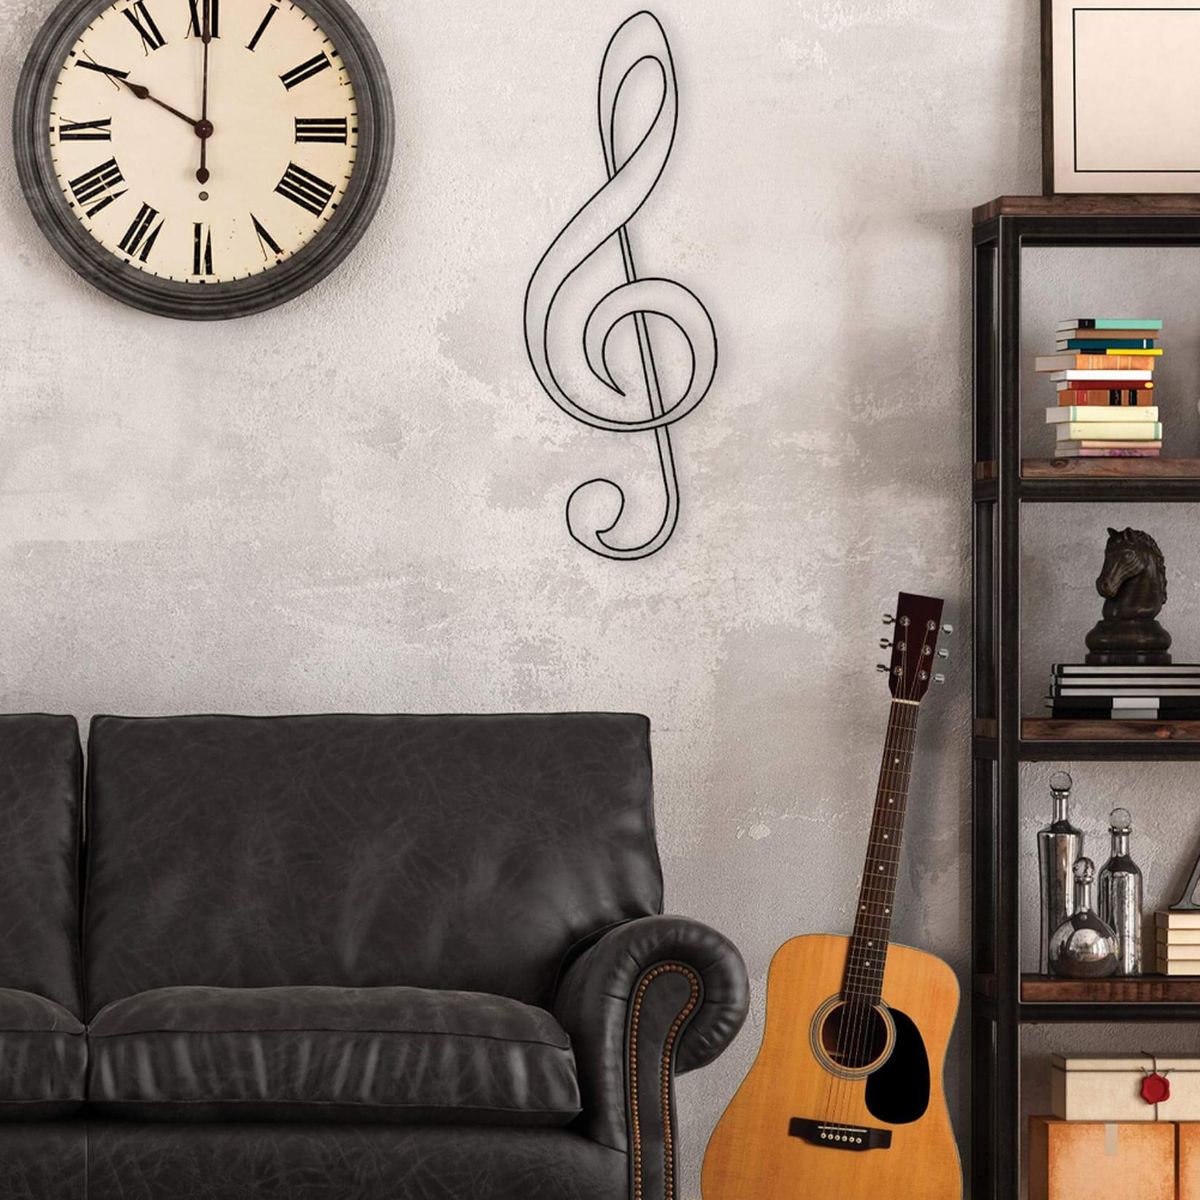 Decorative treble clef to attach to the wall